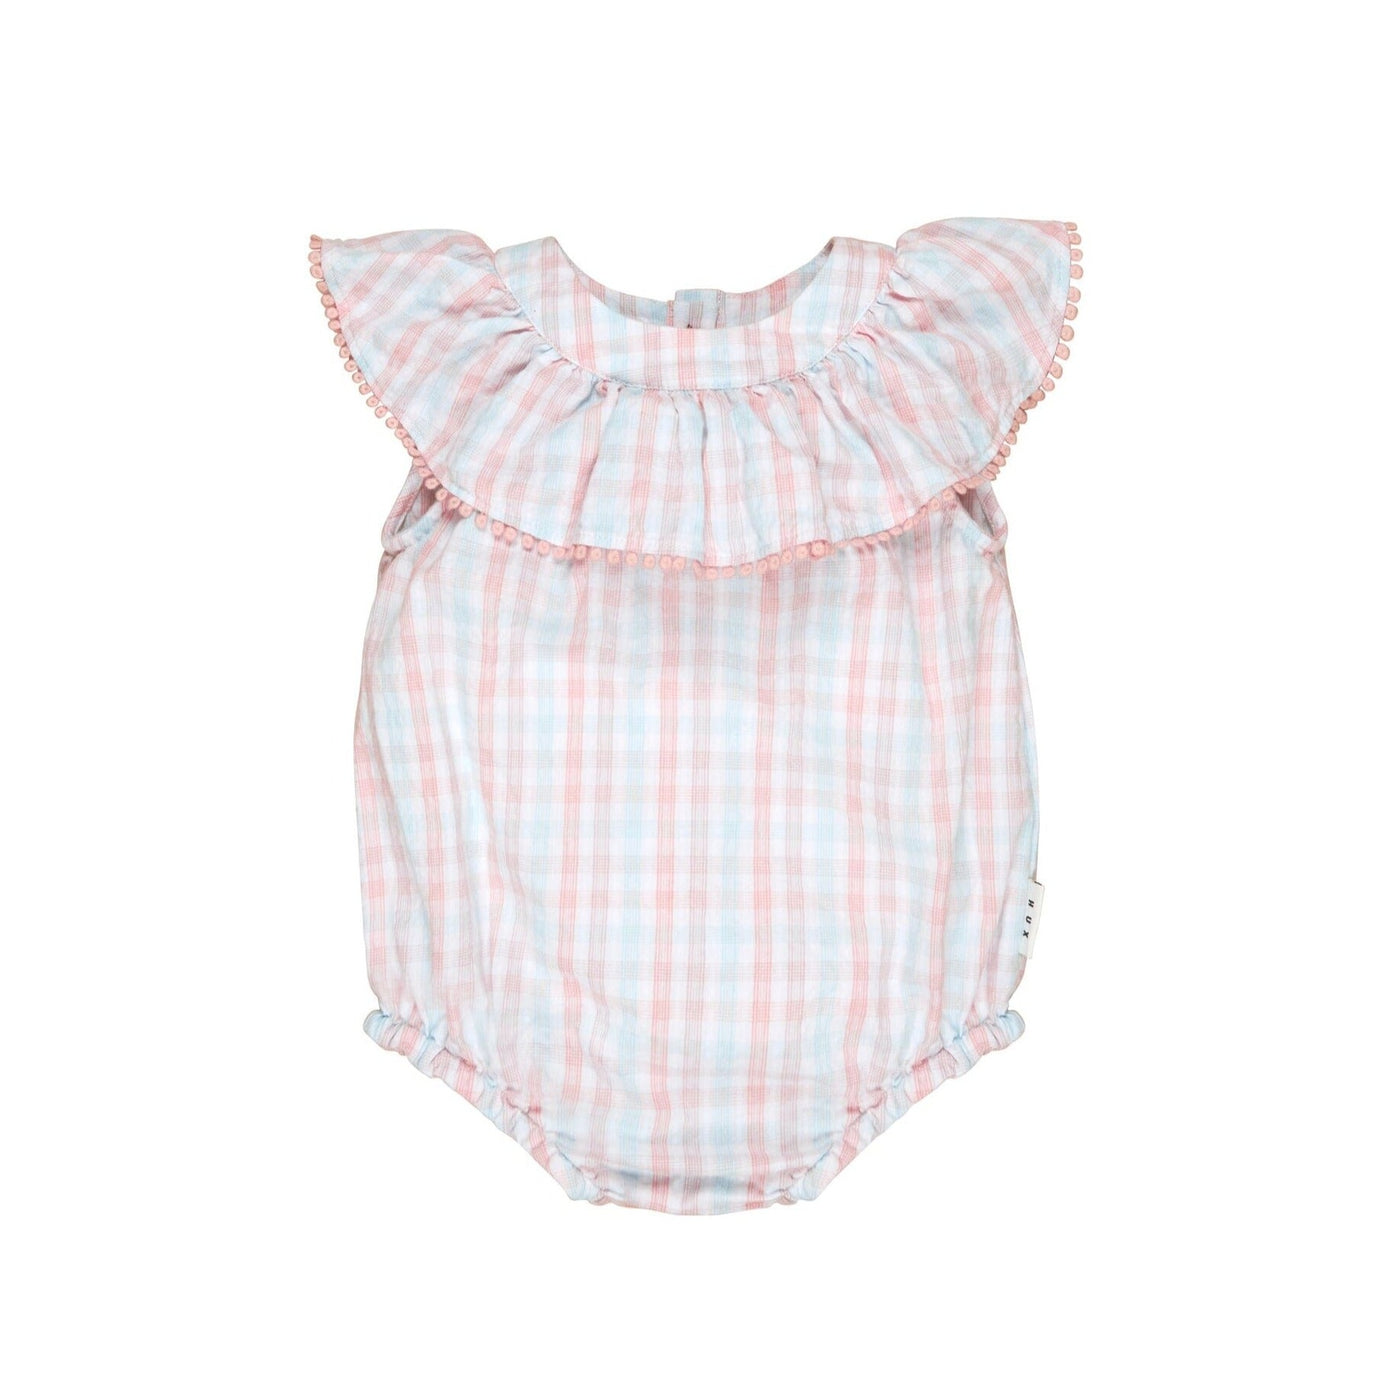 Huxbaby Jewel Check Playsuit HB009S23 Playsuit Huxbaby 